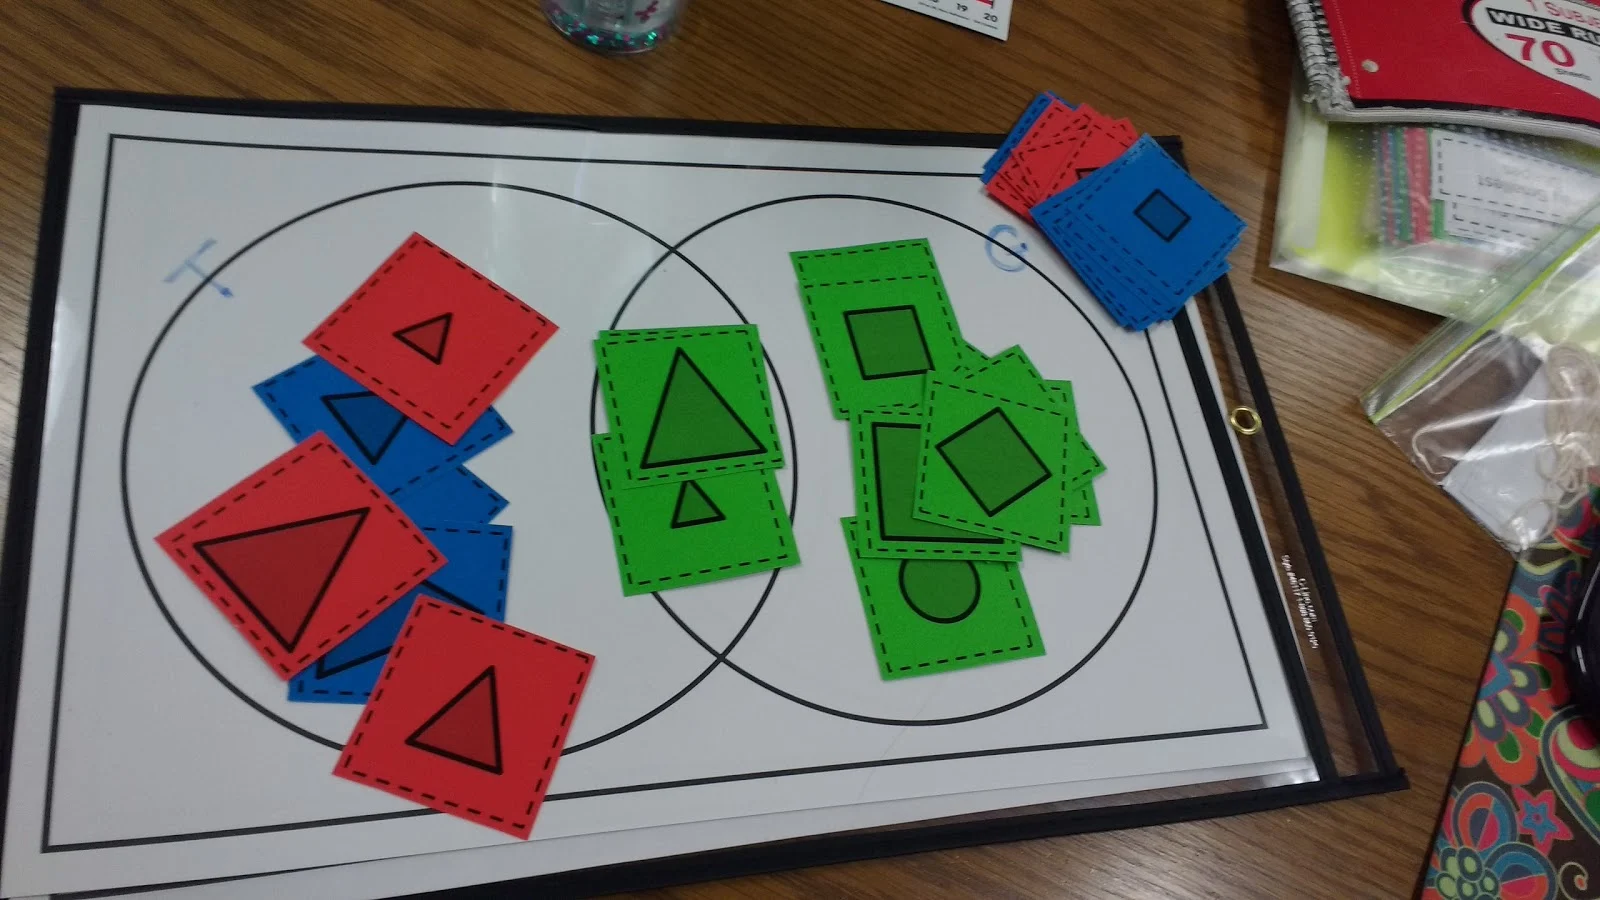 Venn Diagram Template in Dry Erase Pocket with Guess My Rule Cards on Top. 